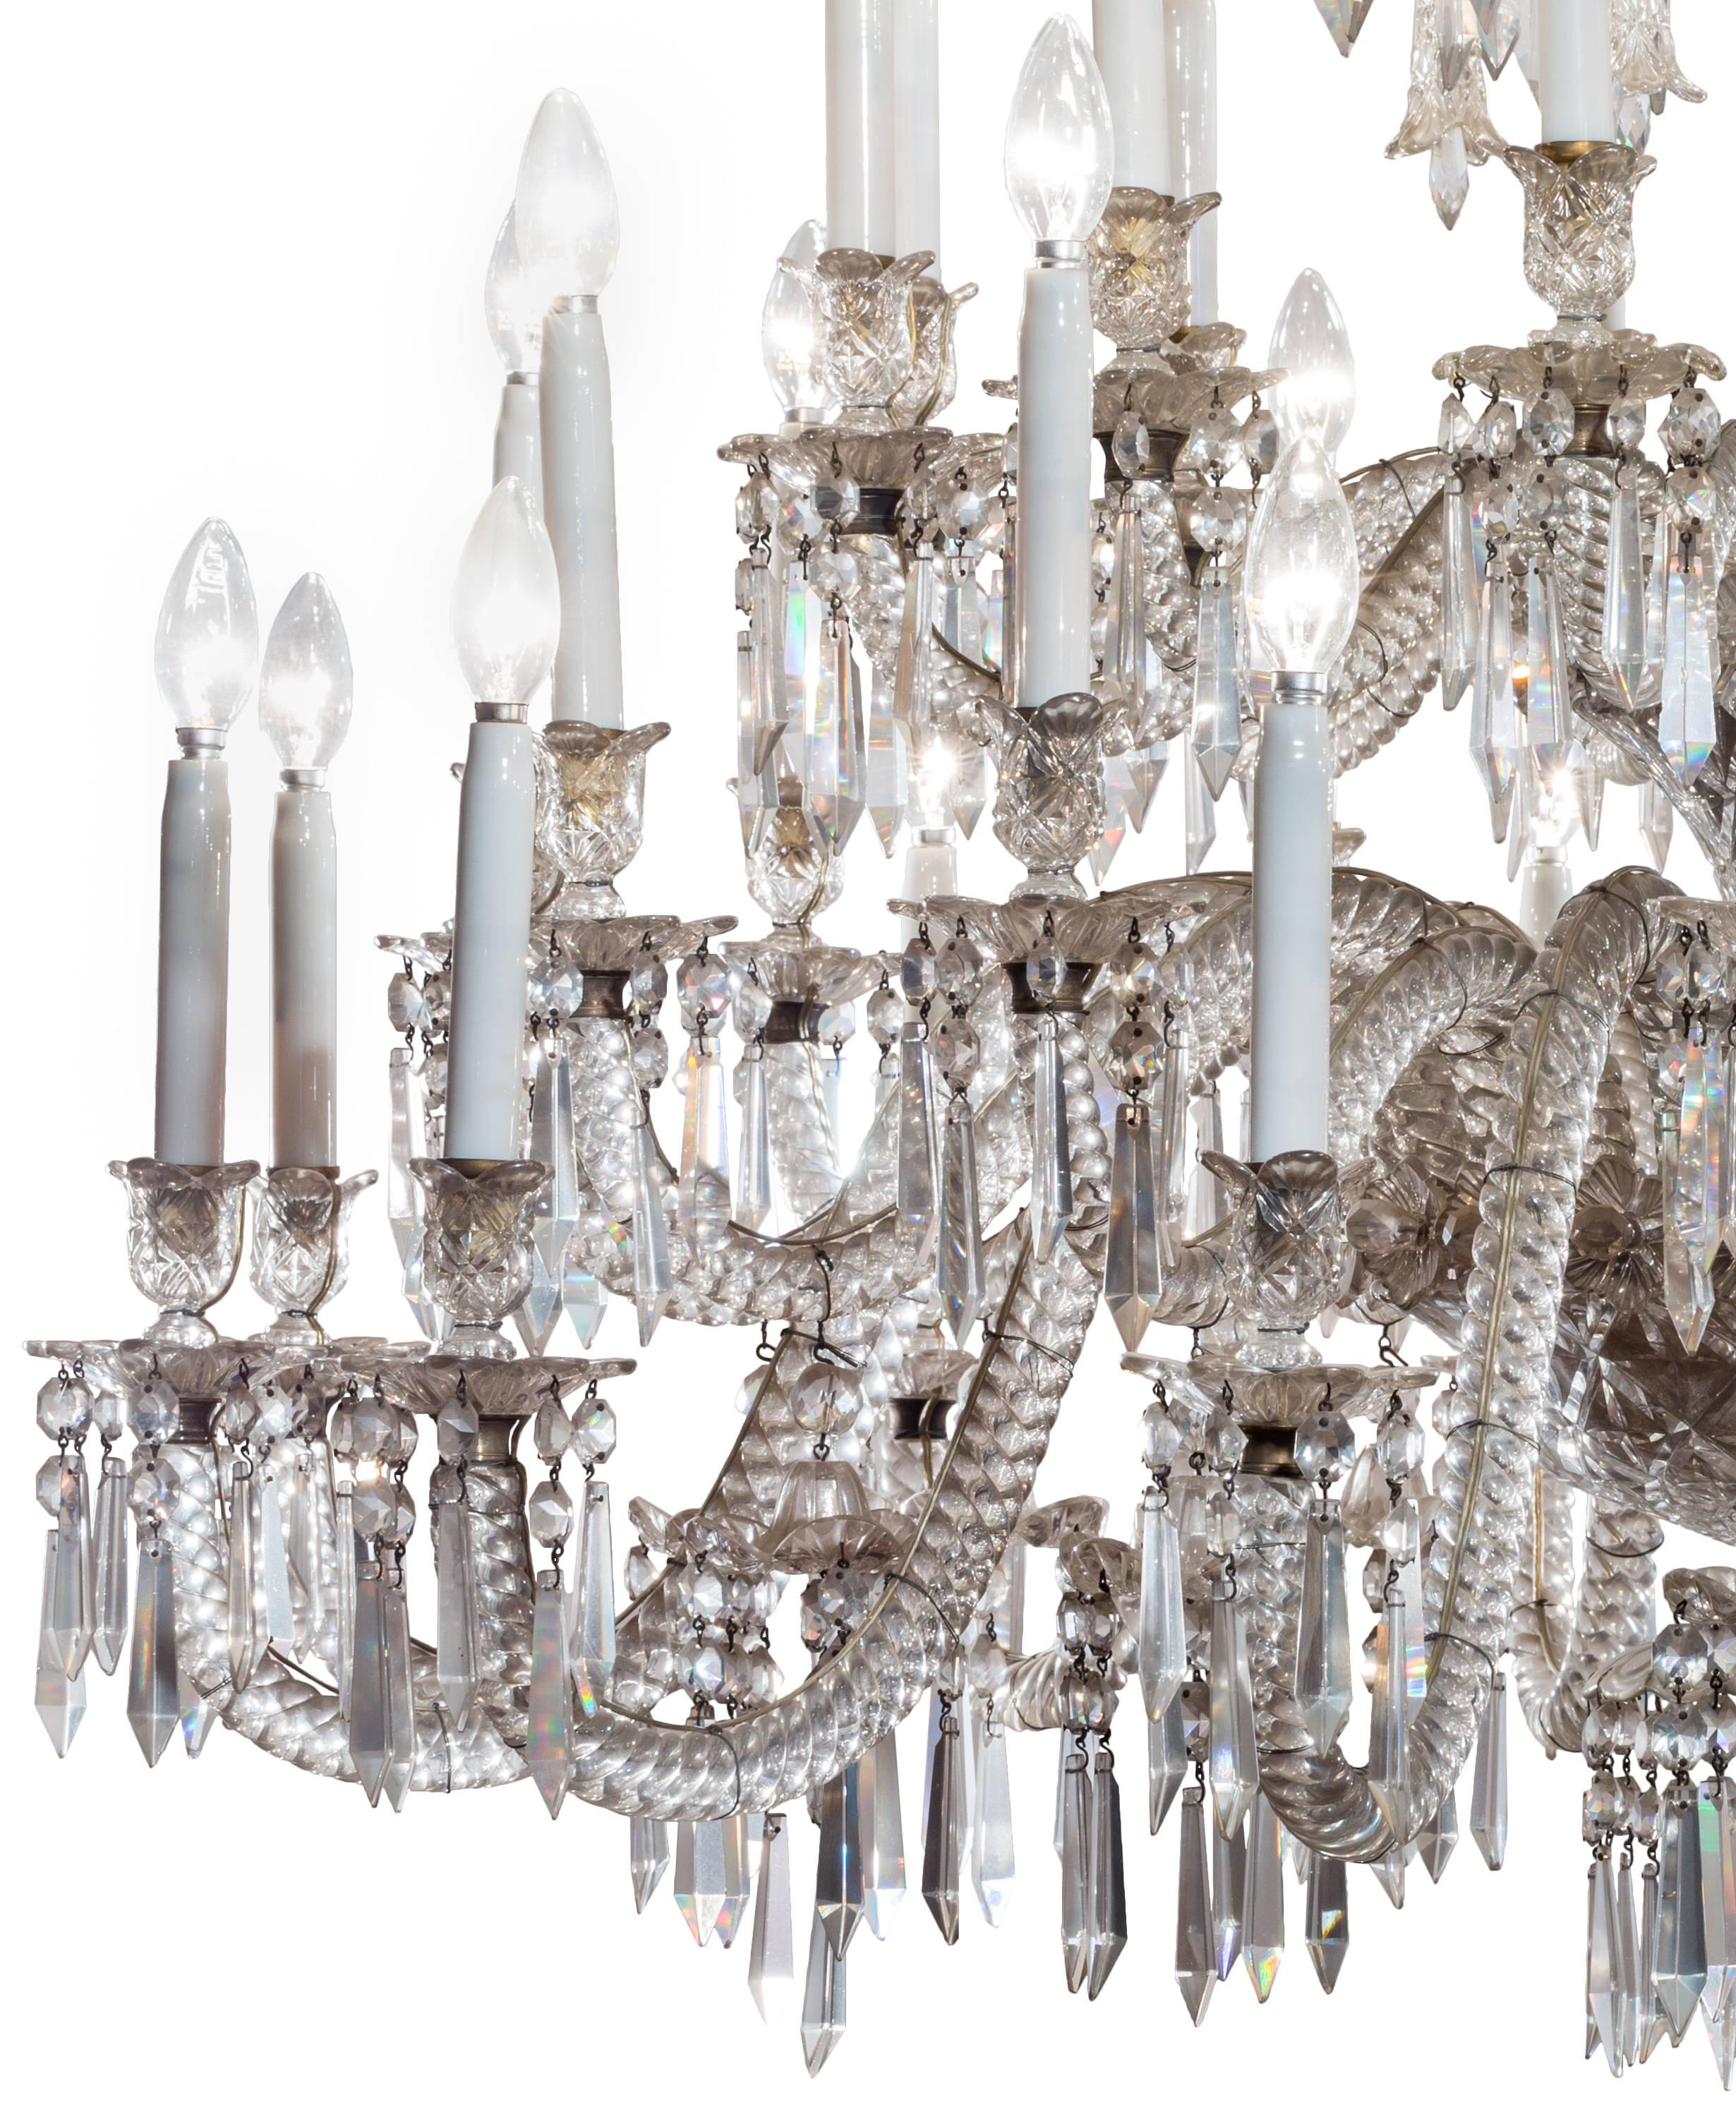 A grand 19th century French Baccarat crystal 36-light, triple-tier chandelier. At over one meter high and wide, this large and impressive style of crystal chandelier was especially popular during the second half of the nineteenth century, when